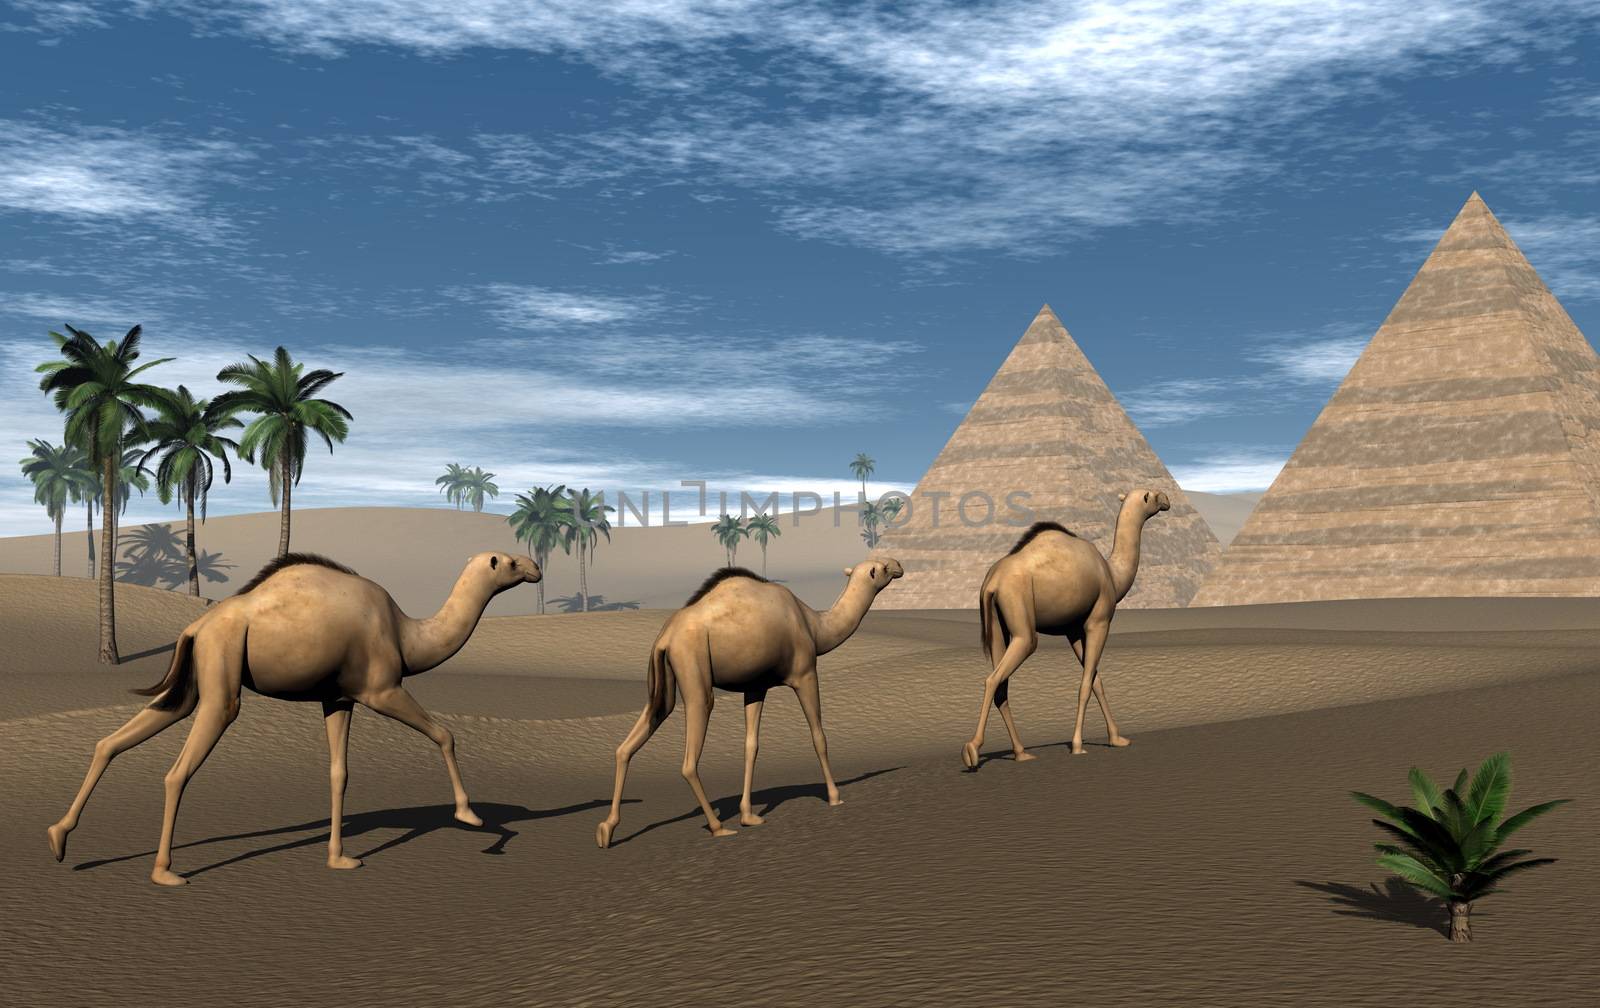 Three camels walking towards pyramids in the desert by day - 3D render